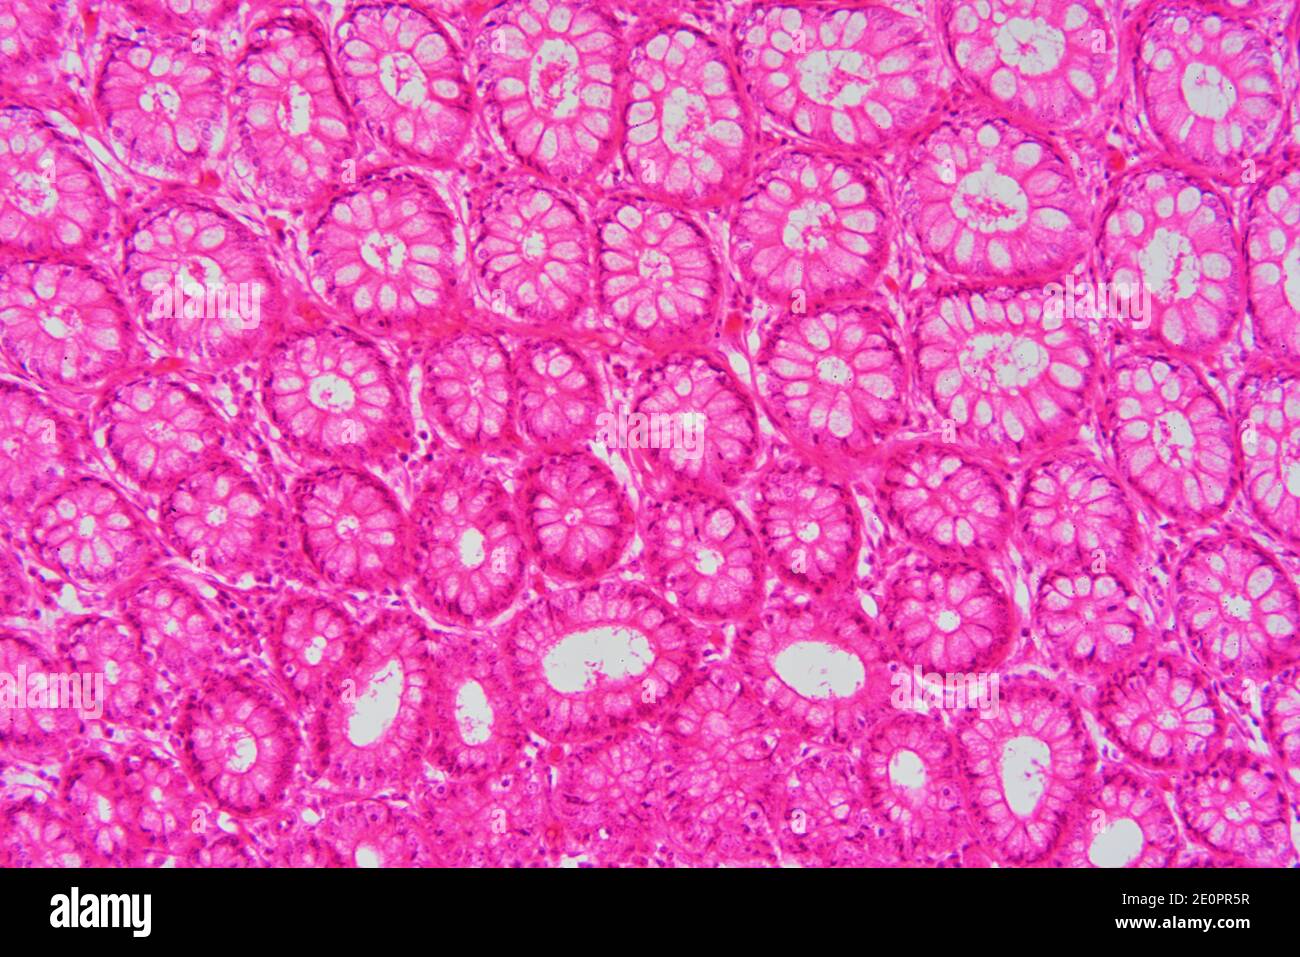 Human large intestine (colon) showing mucosa with Lieberkhun crypts. X125 at 10 cm wide. Stock Photo